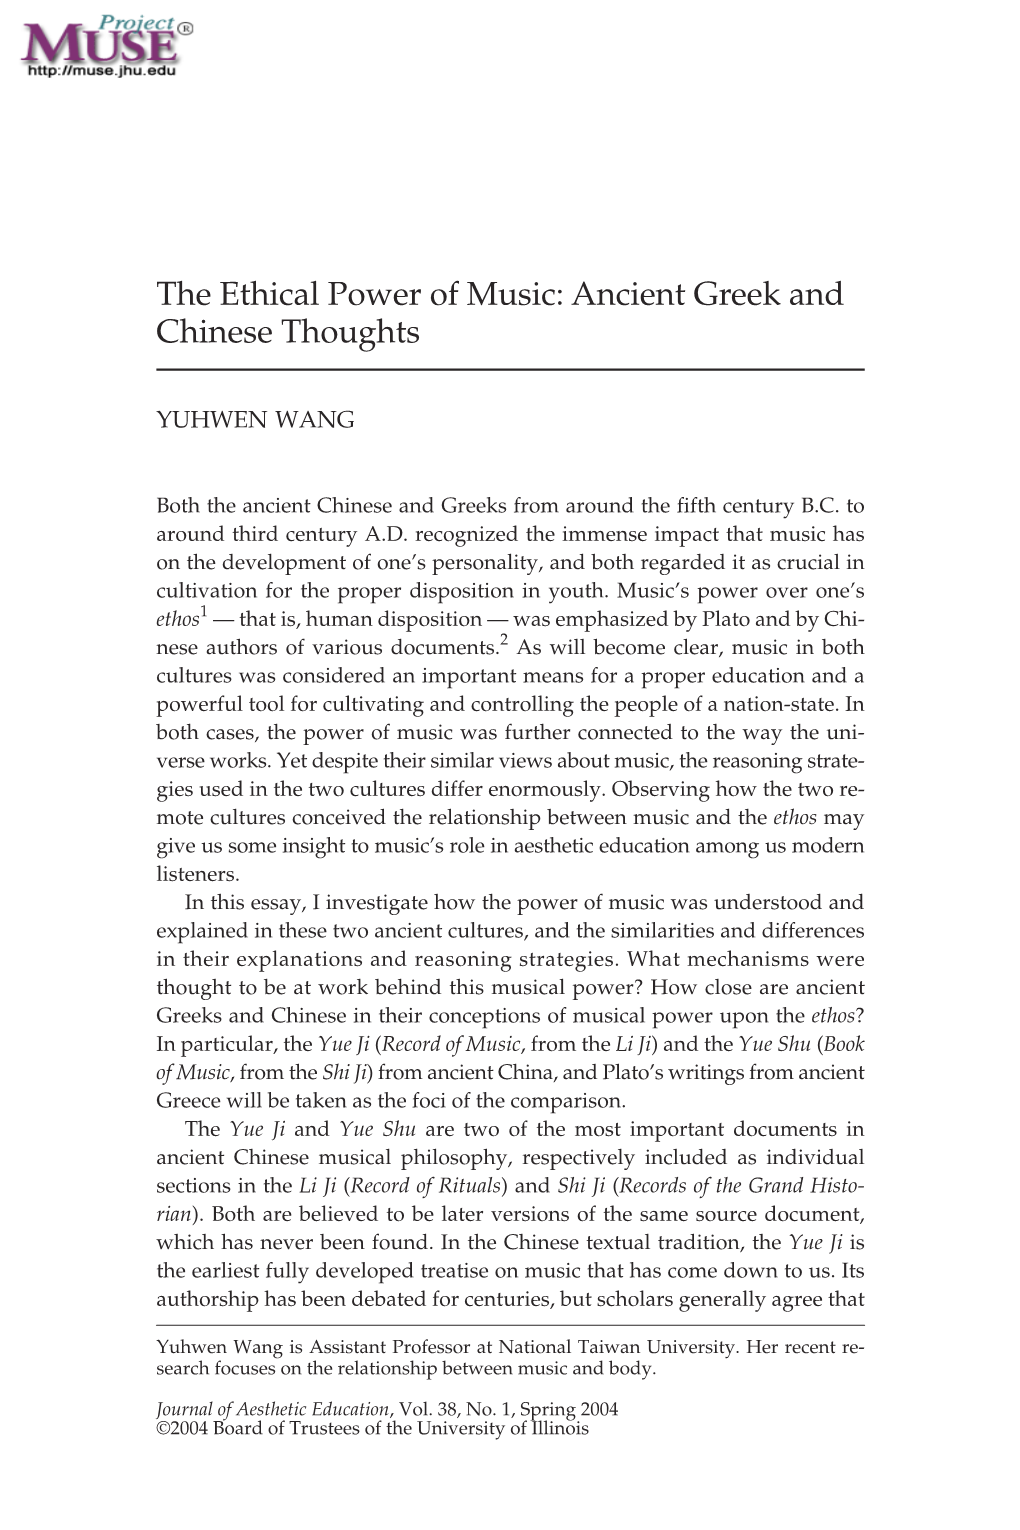 The Ethical Power of Music: Ancient Greek and Chinese Thoughts